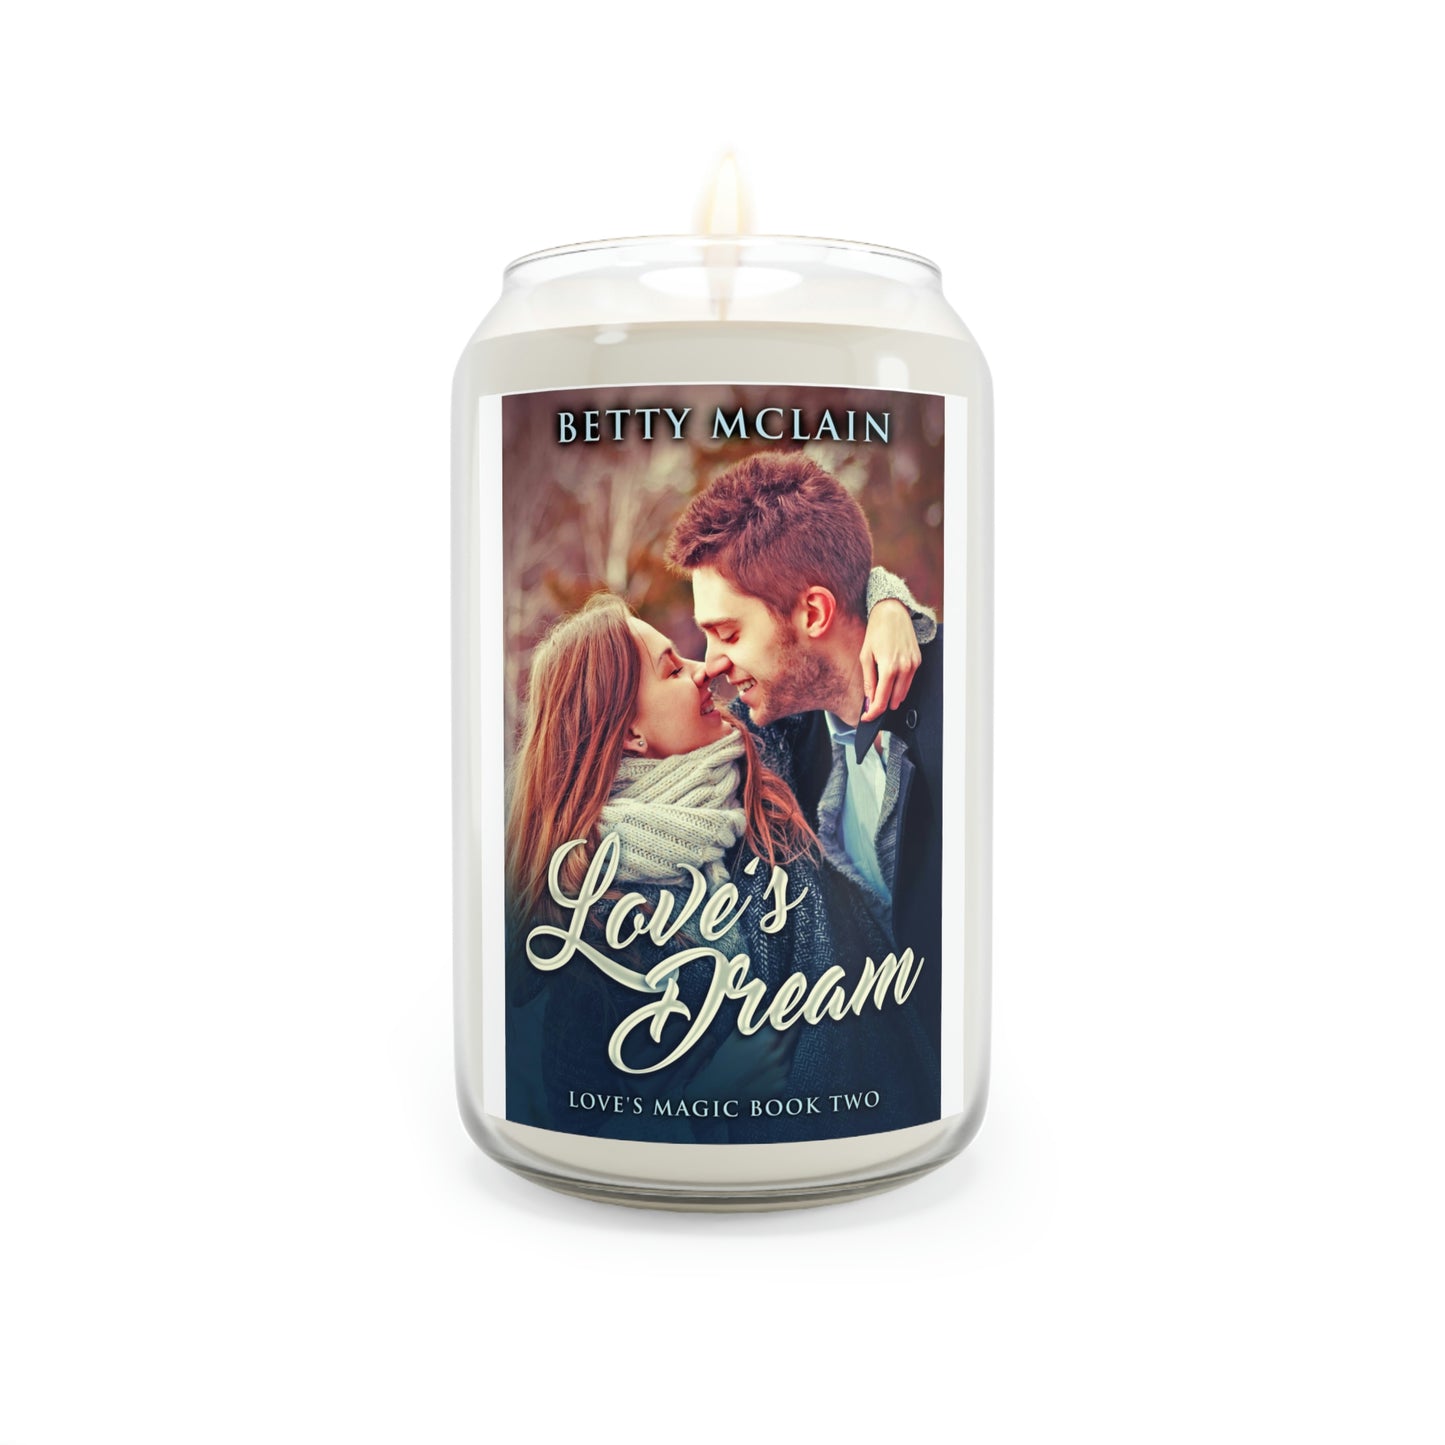 Love's Dream - Scented Candle